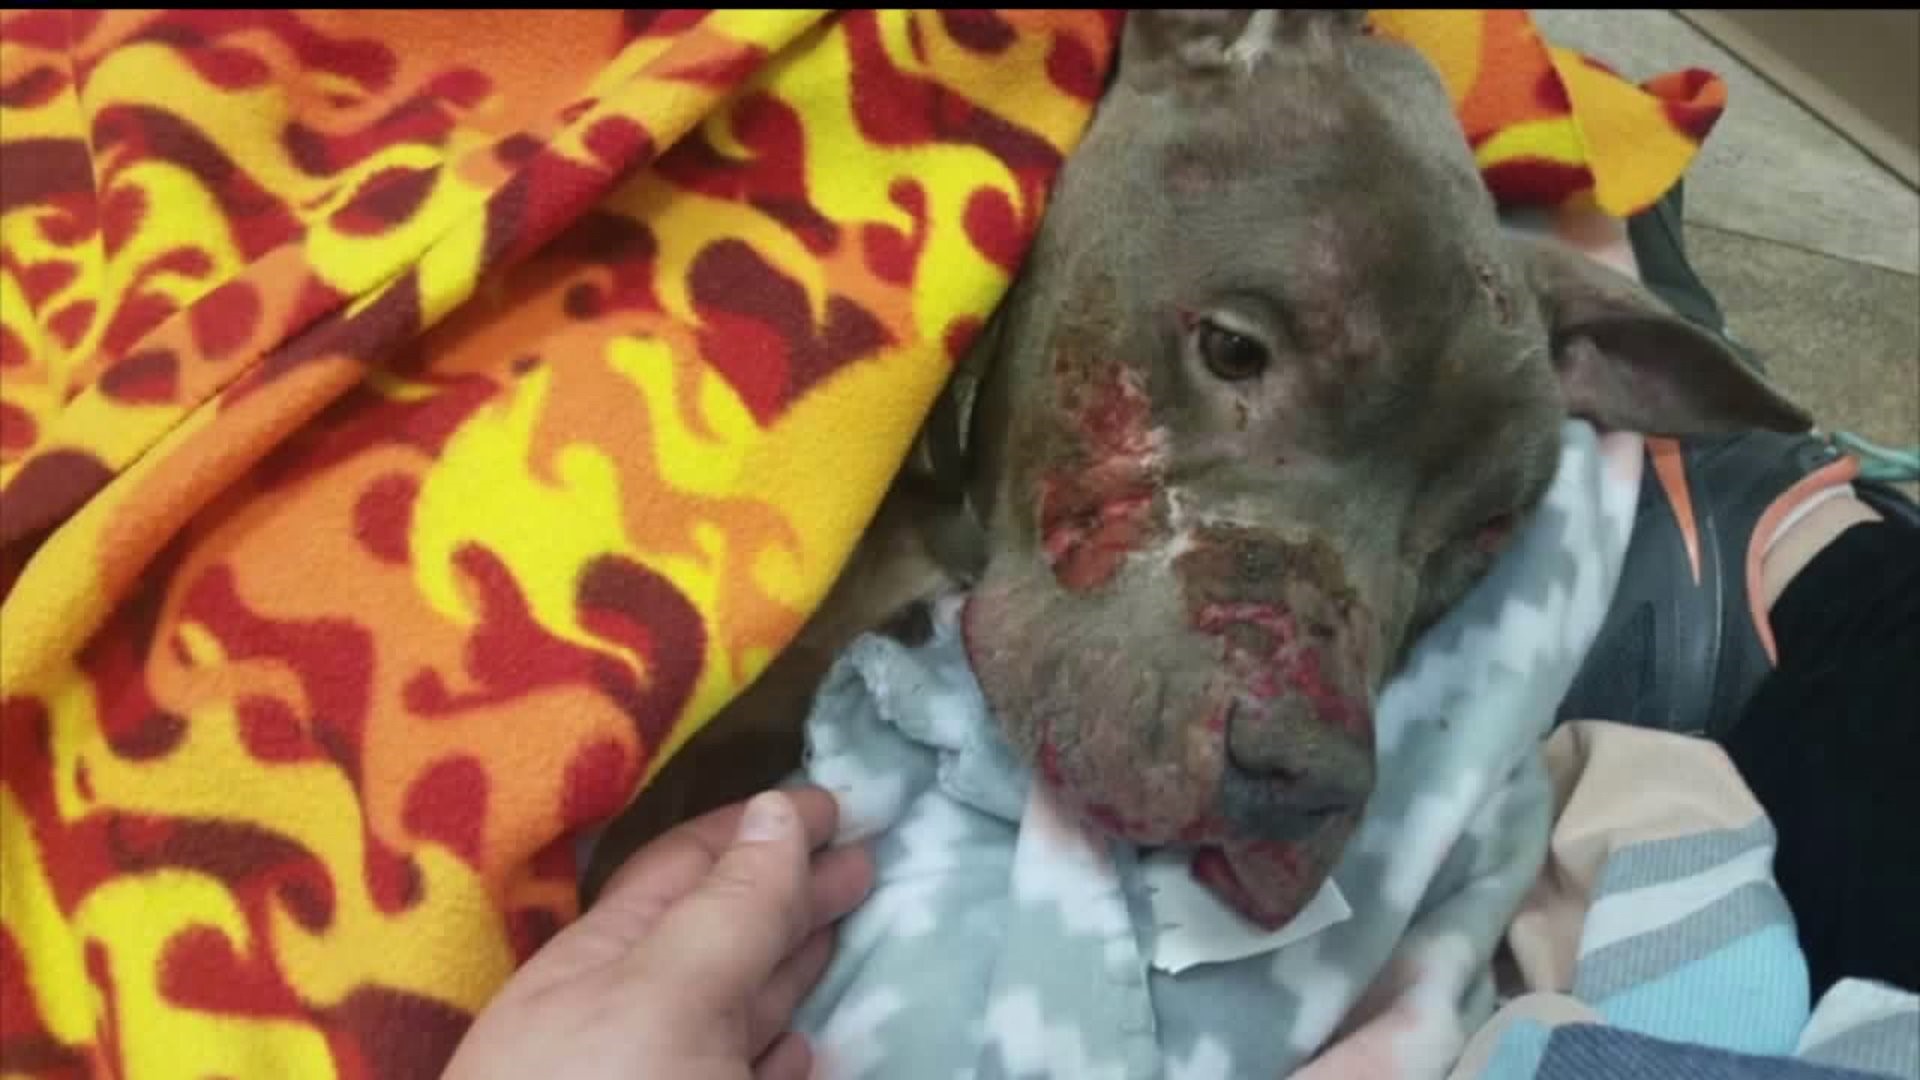 Charges filed after neglected dog dies